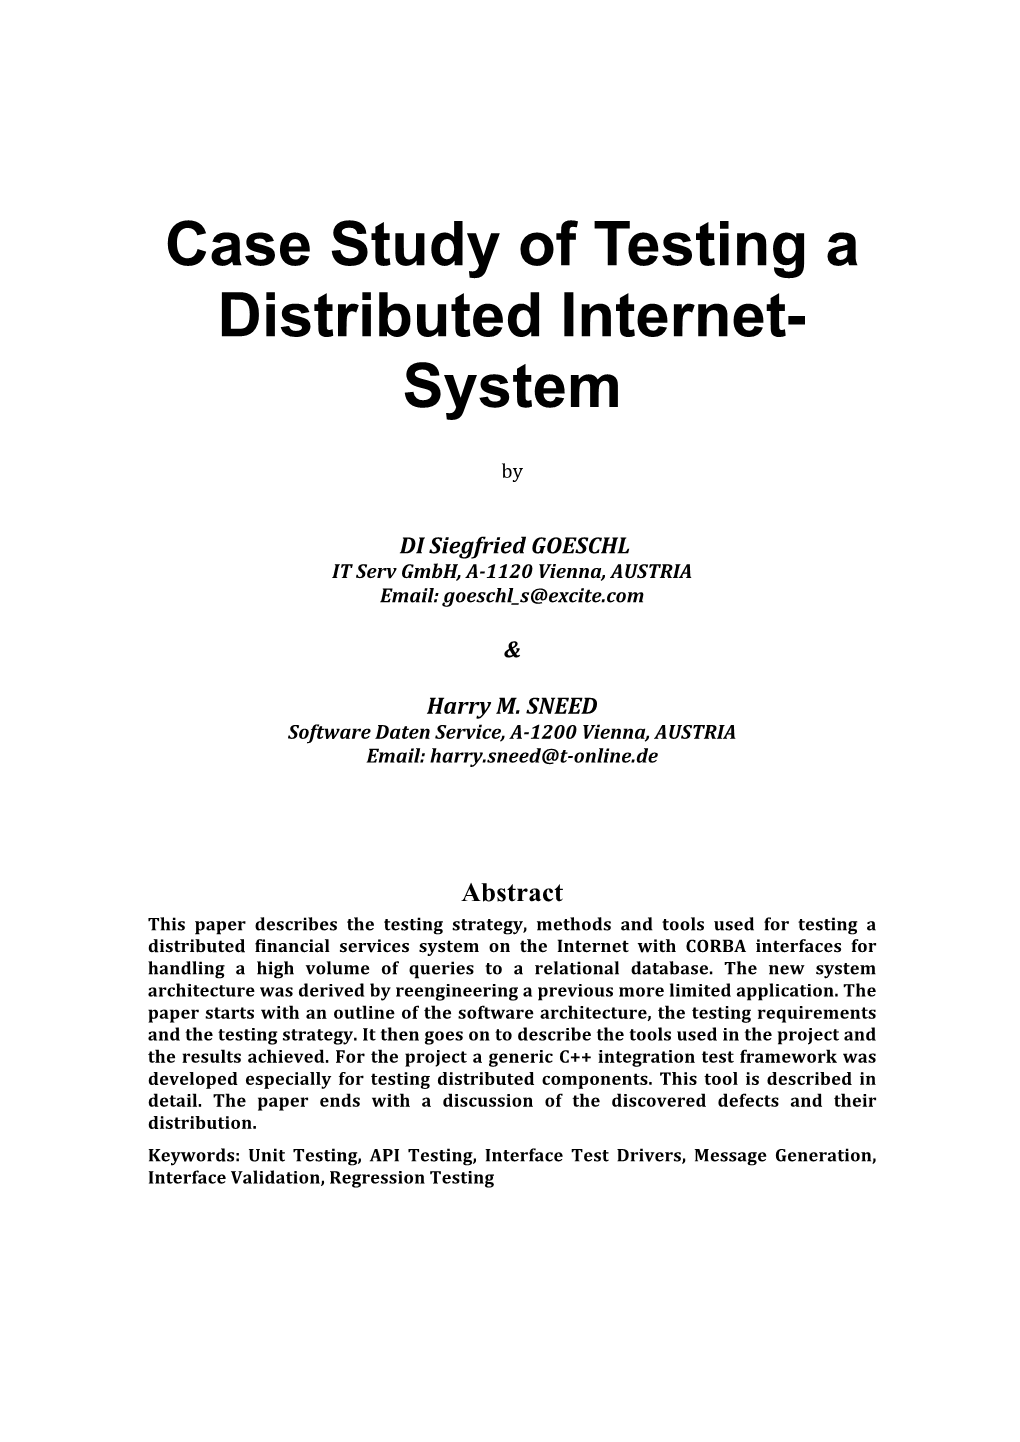 Case Study of Testing a Distributed Internet- System